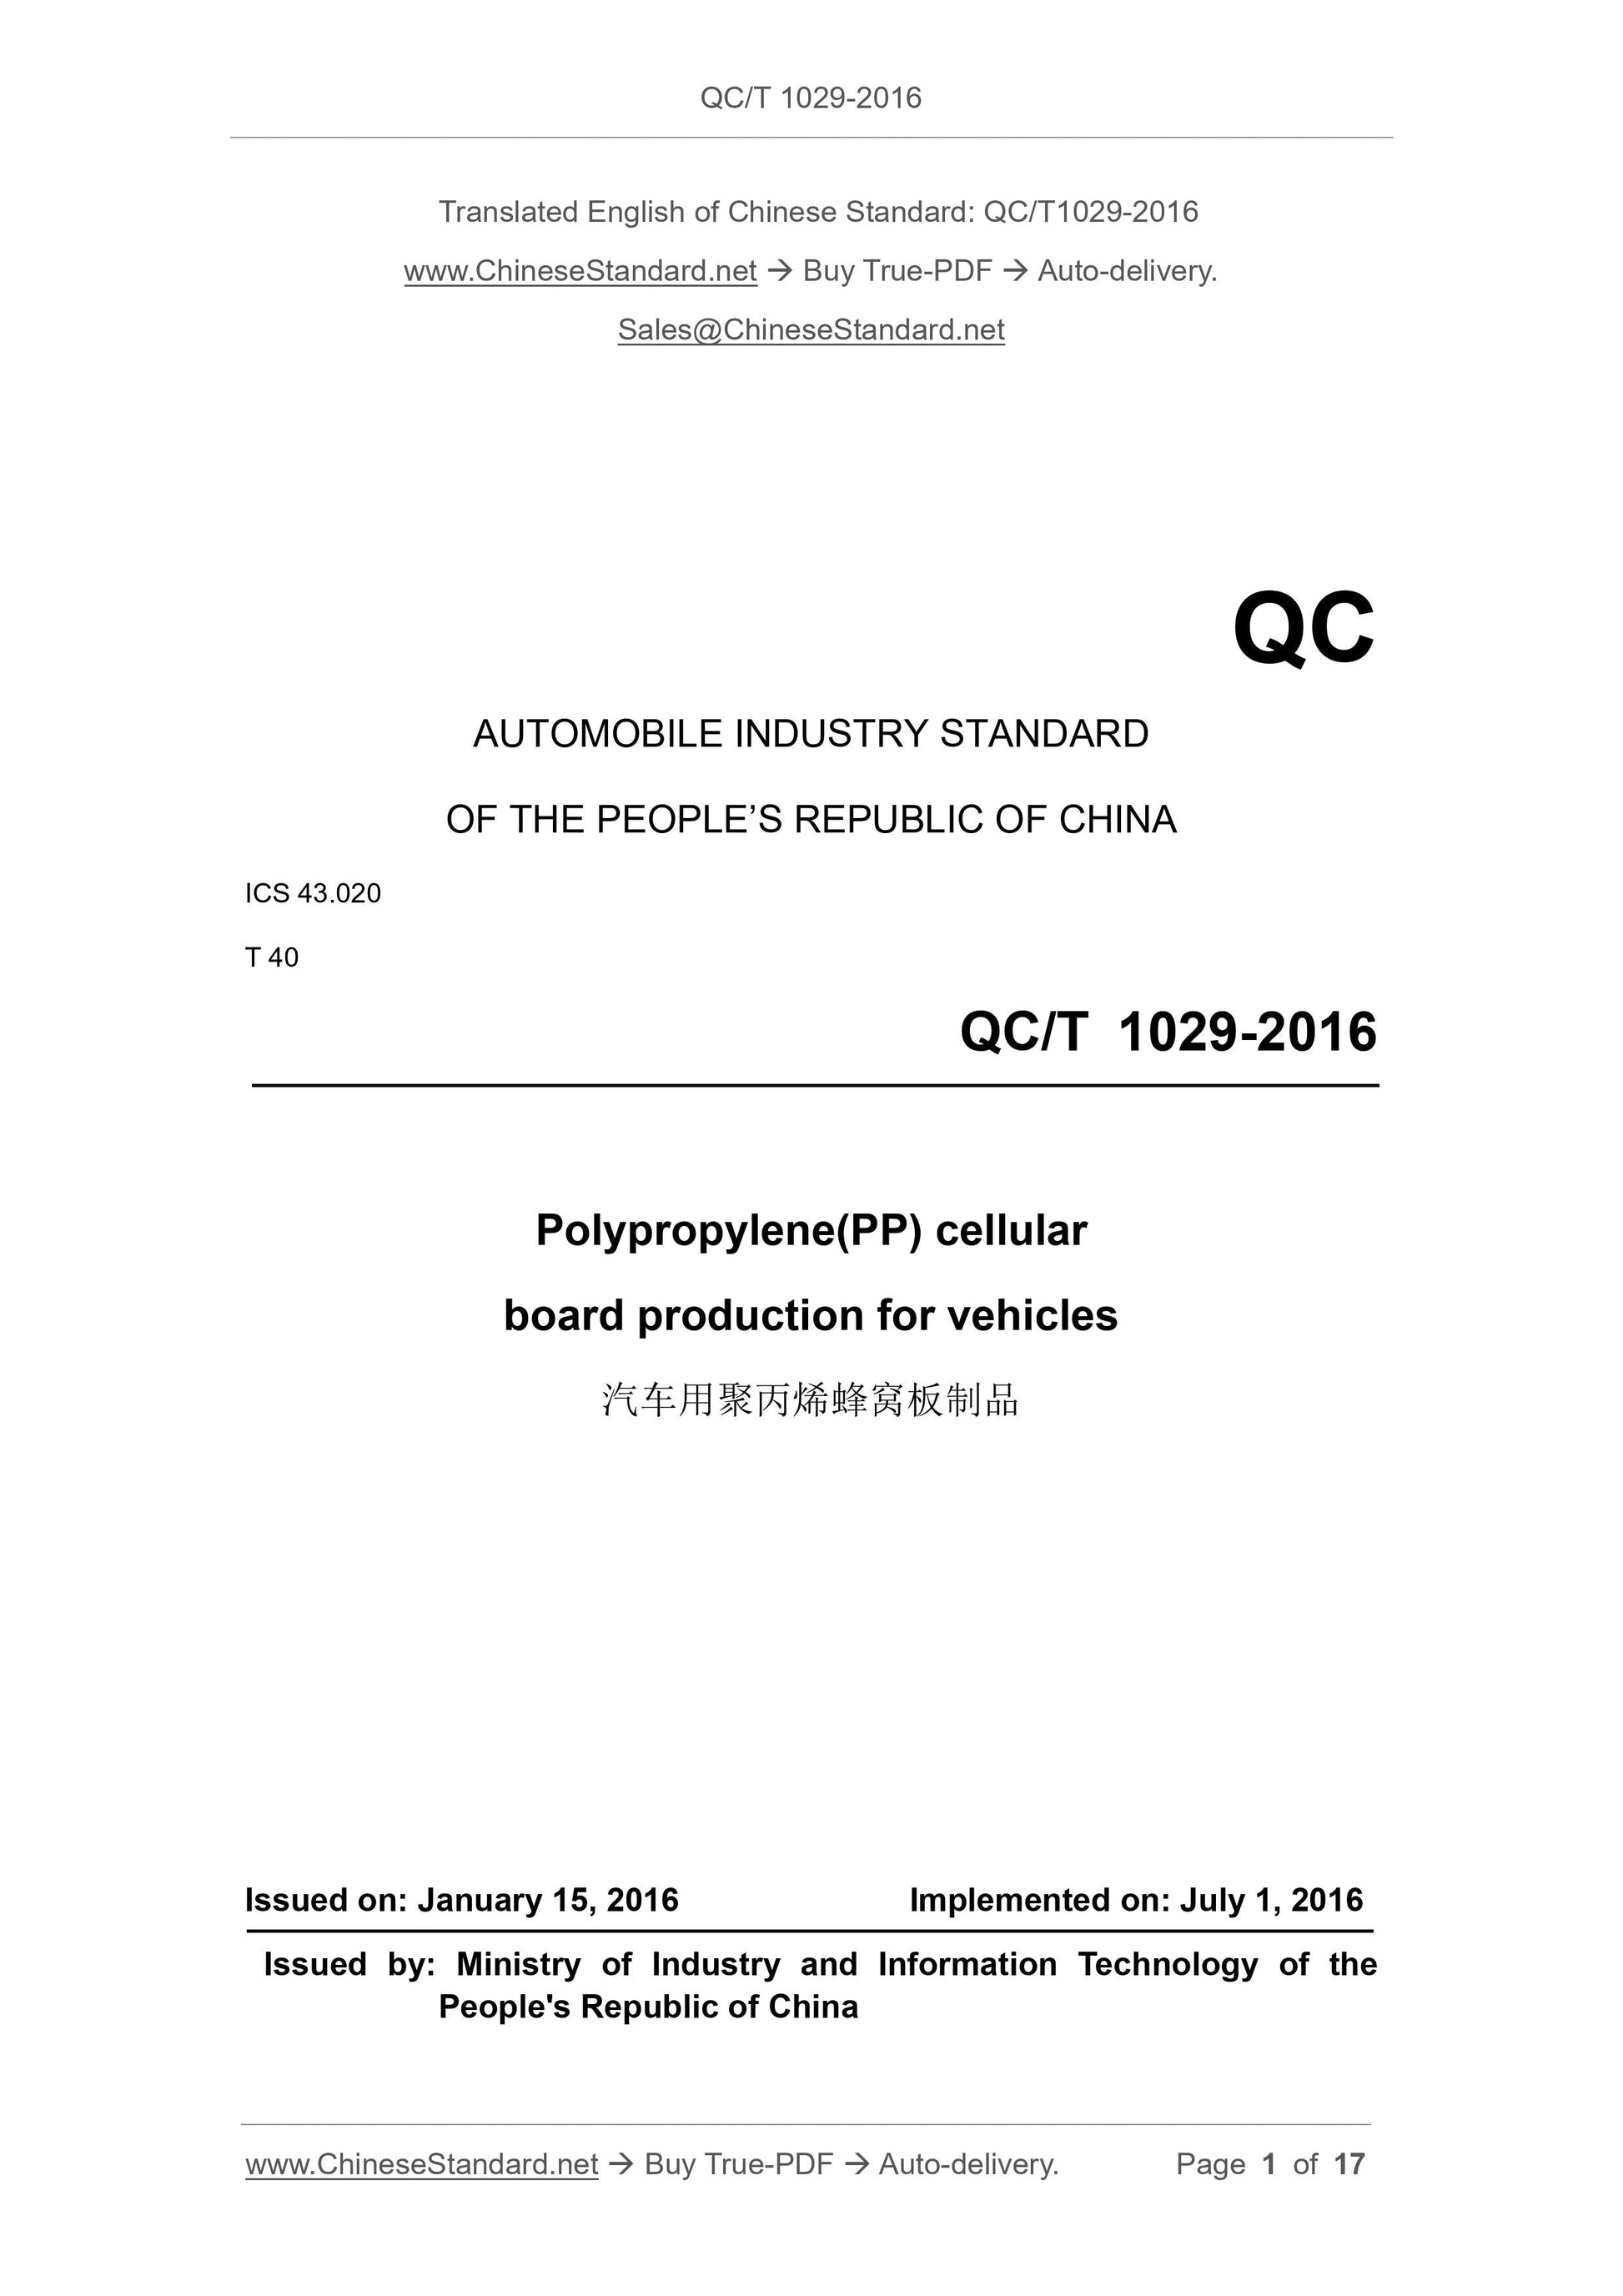 QC/T 1029-2016 Page 1